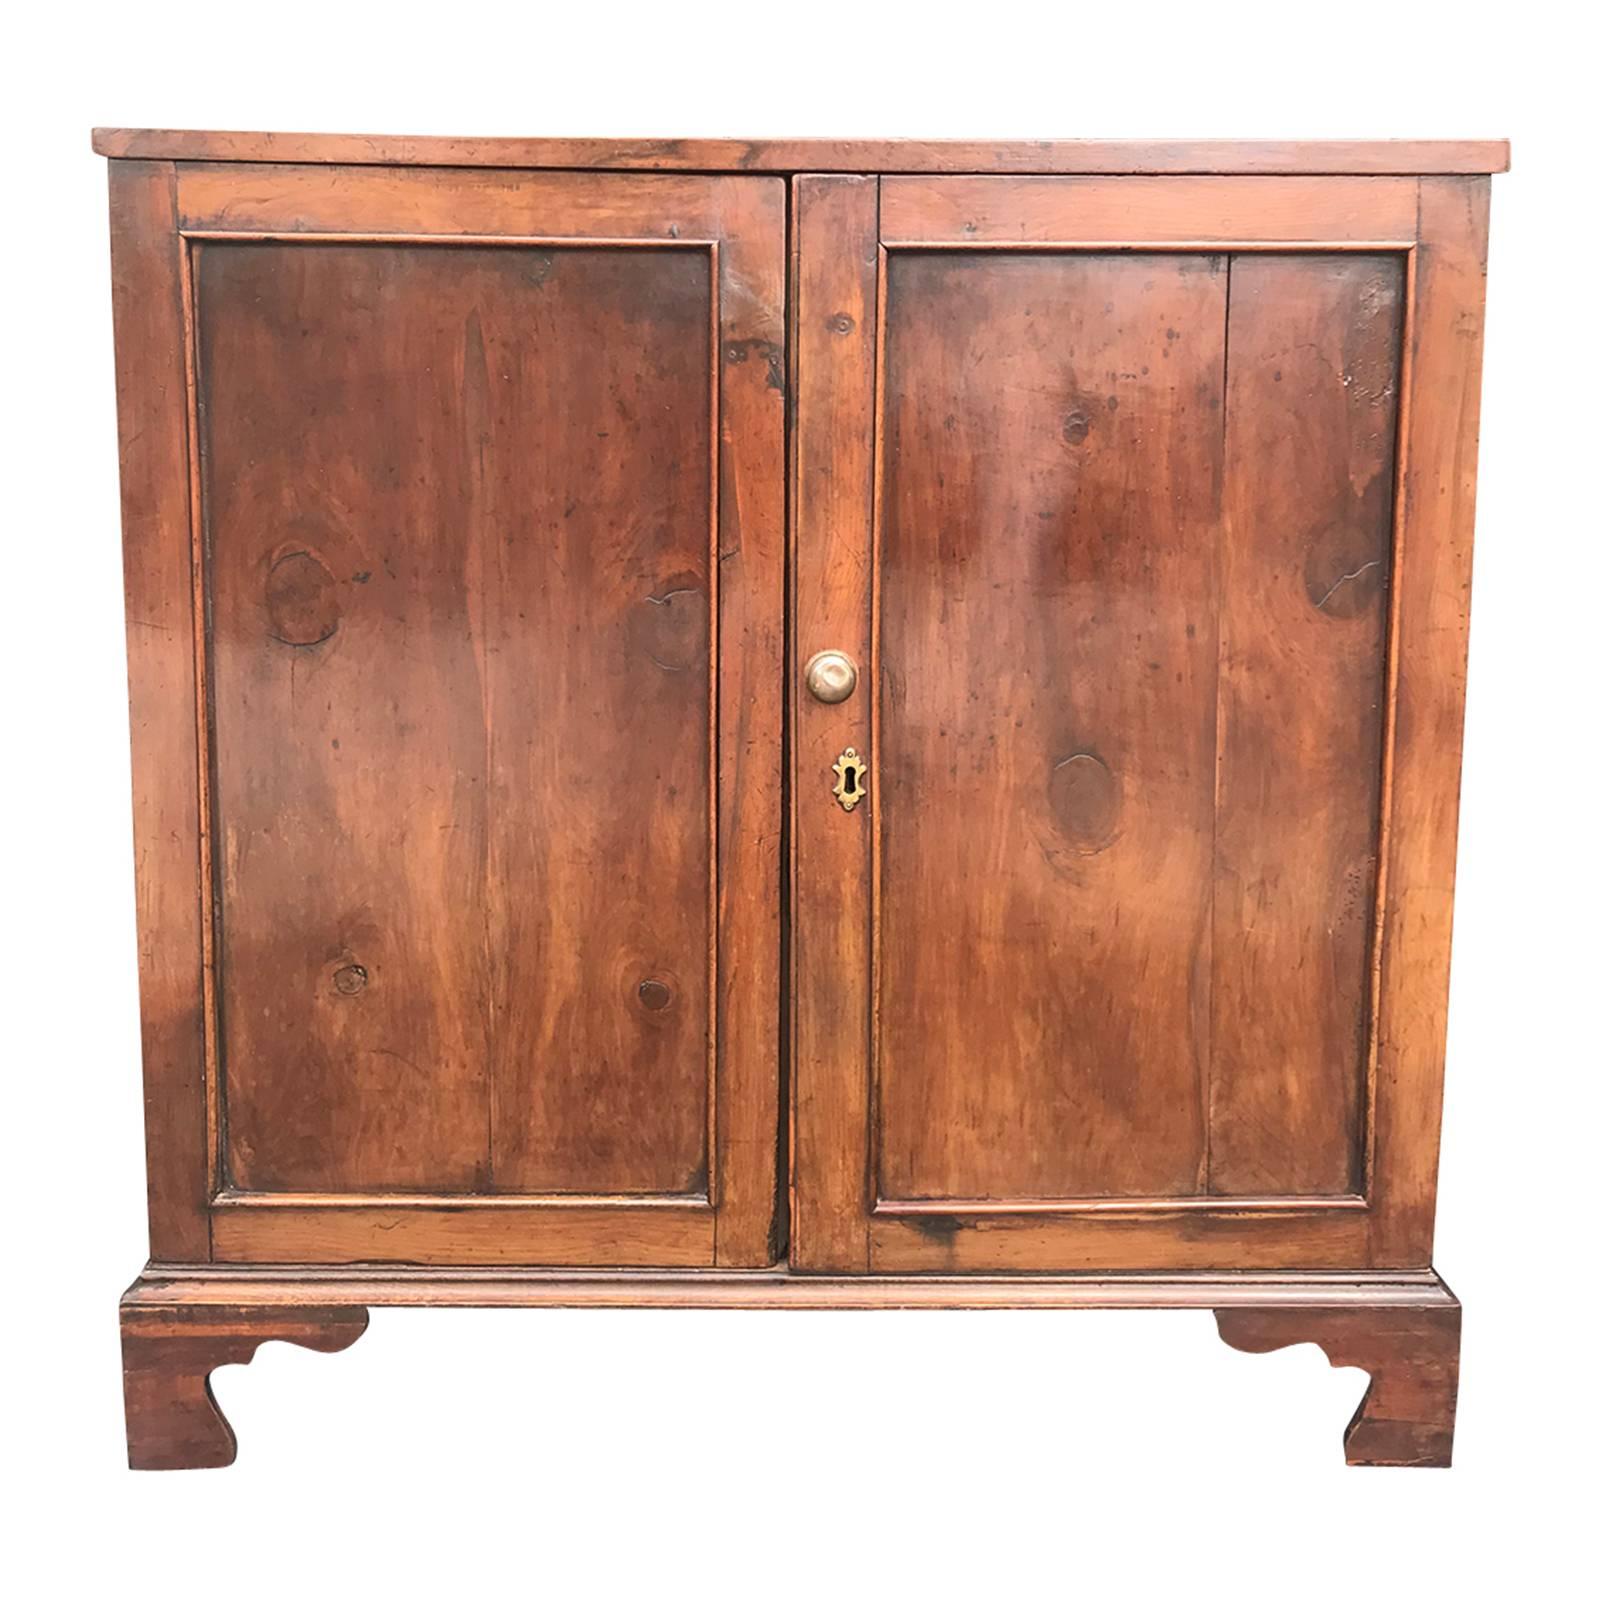 19th Century English Rare Species Pine Cabinet, Two Shelves